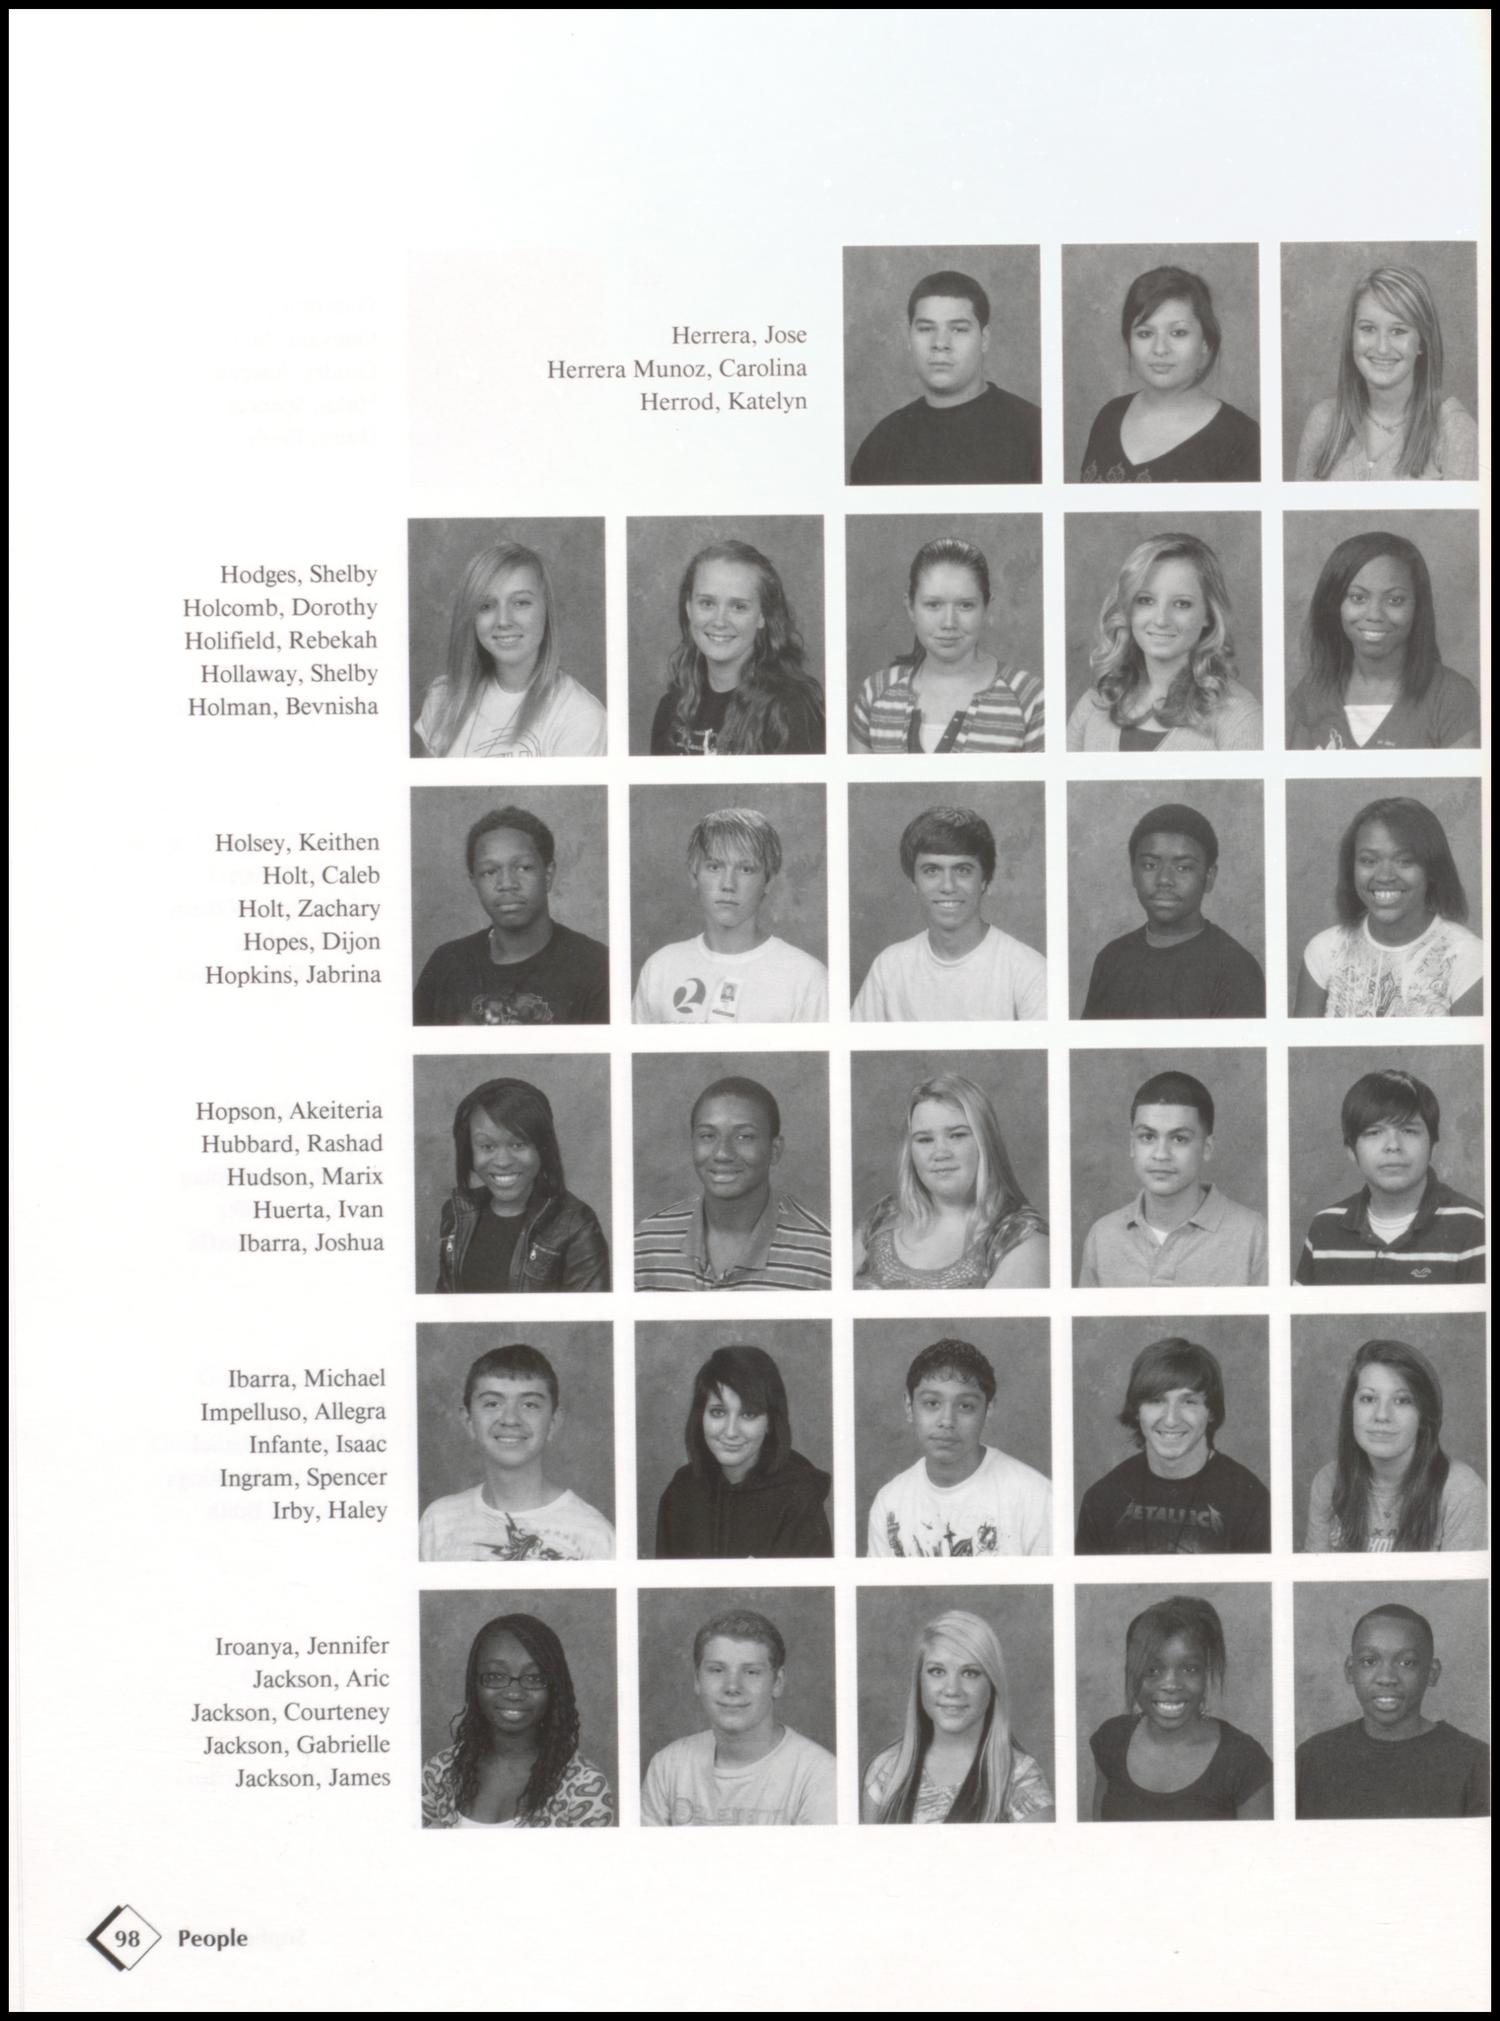 The Governor, Yearbook of Ross S. Sterling High School, 2010
                                                
                                                    98
                                                